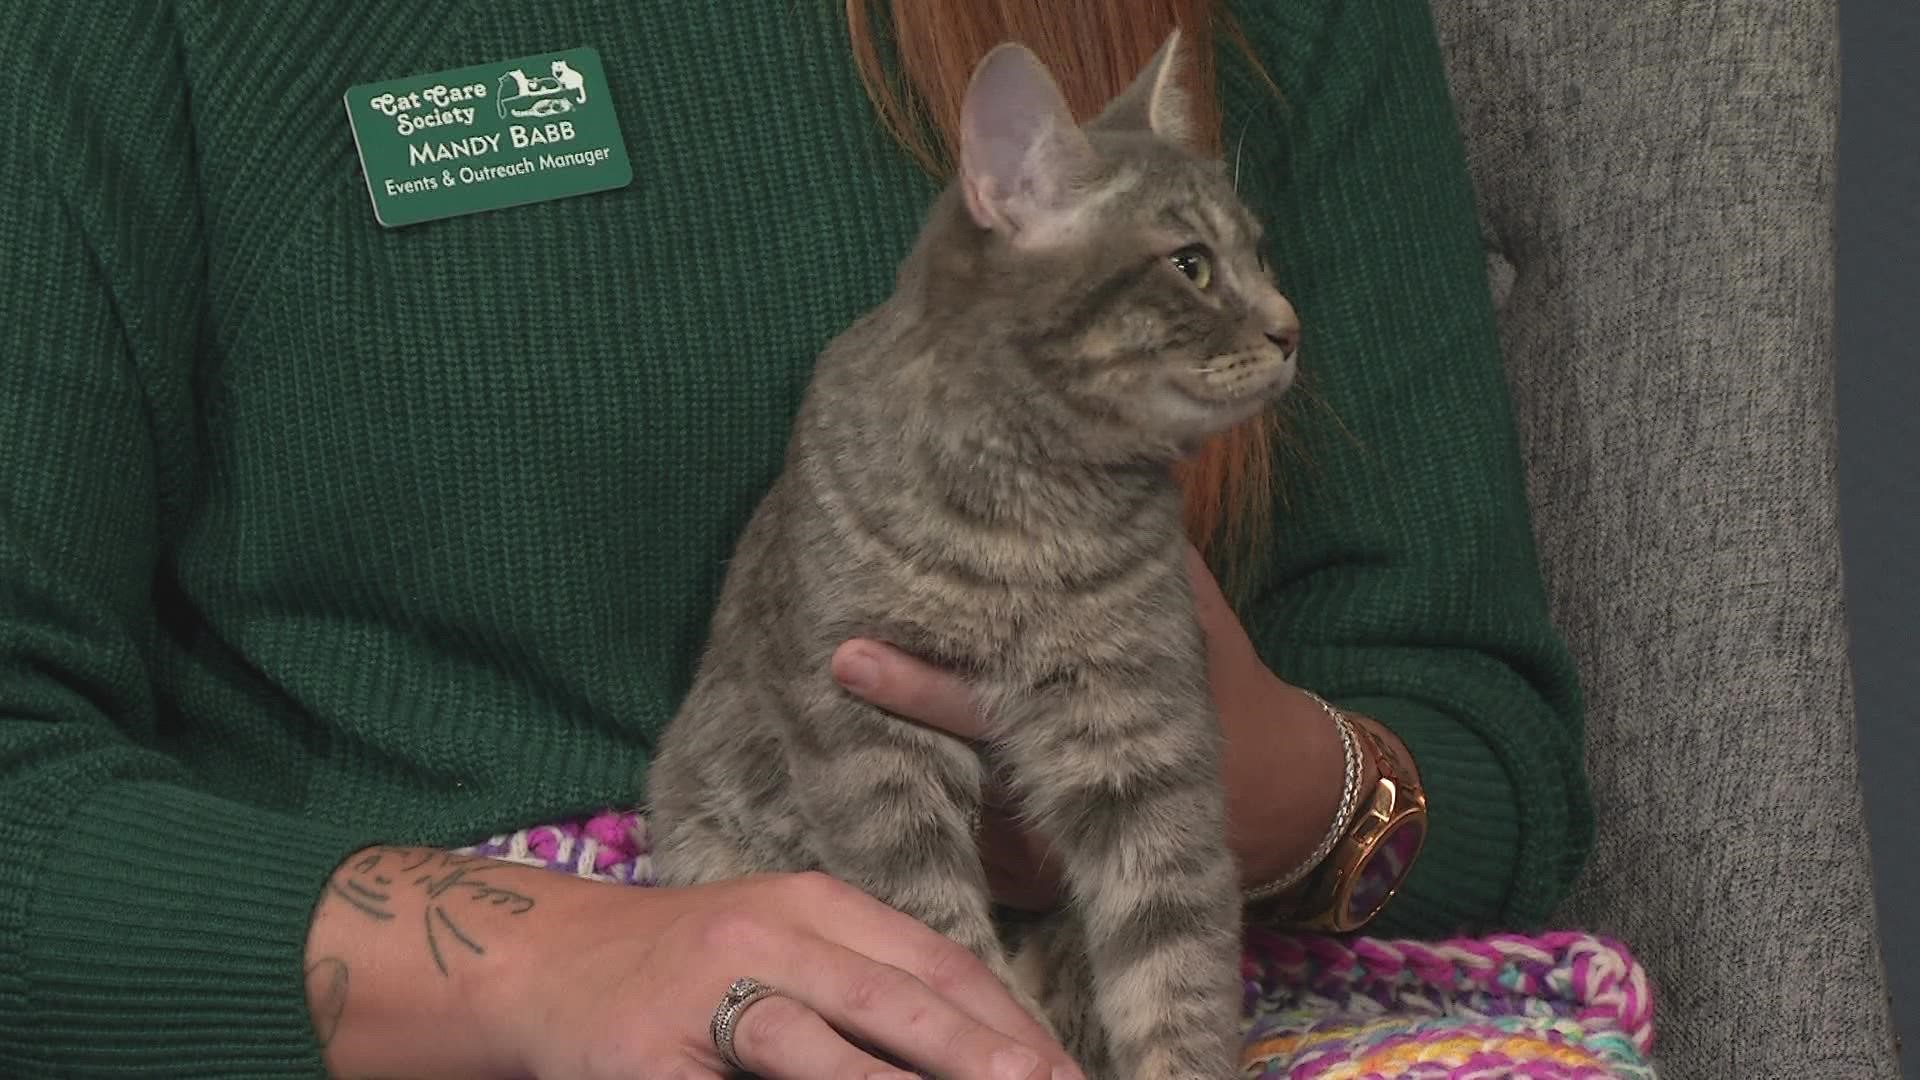 Judy Blue is a 6-month-old kitten up for adoption at the Cat Care Society.